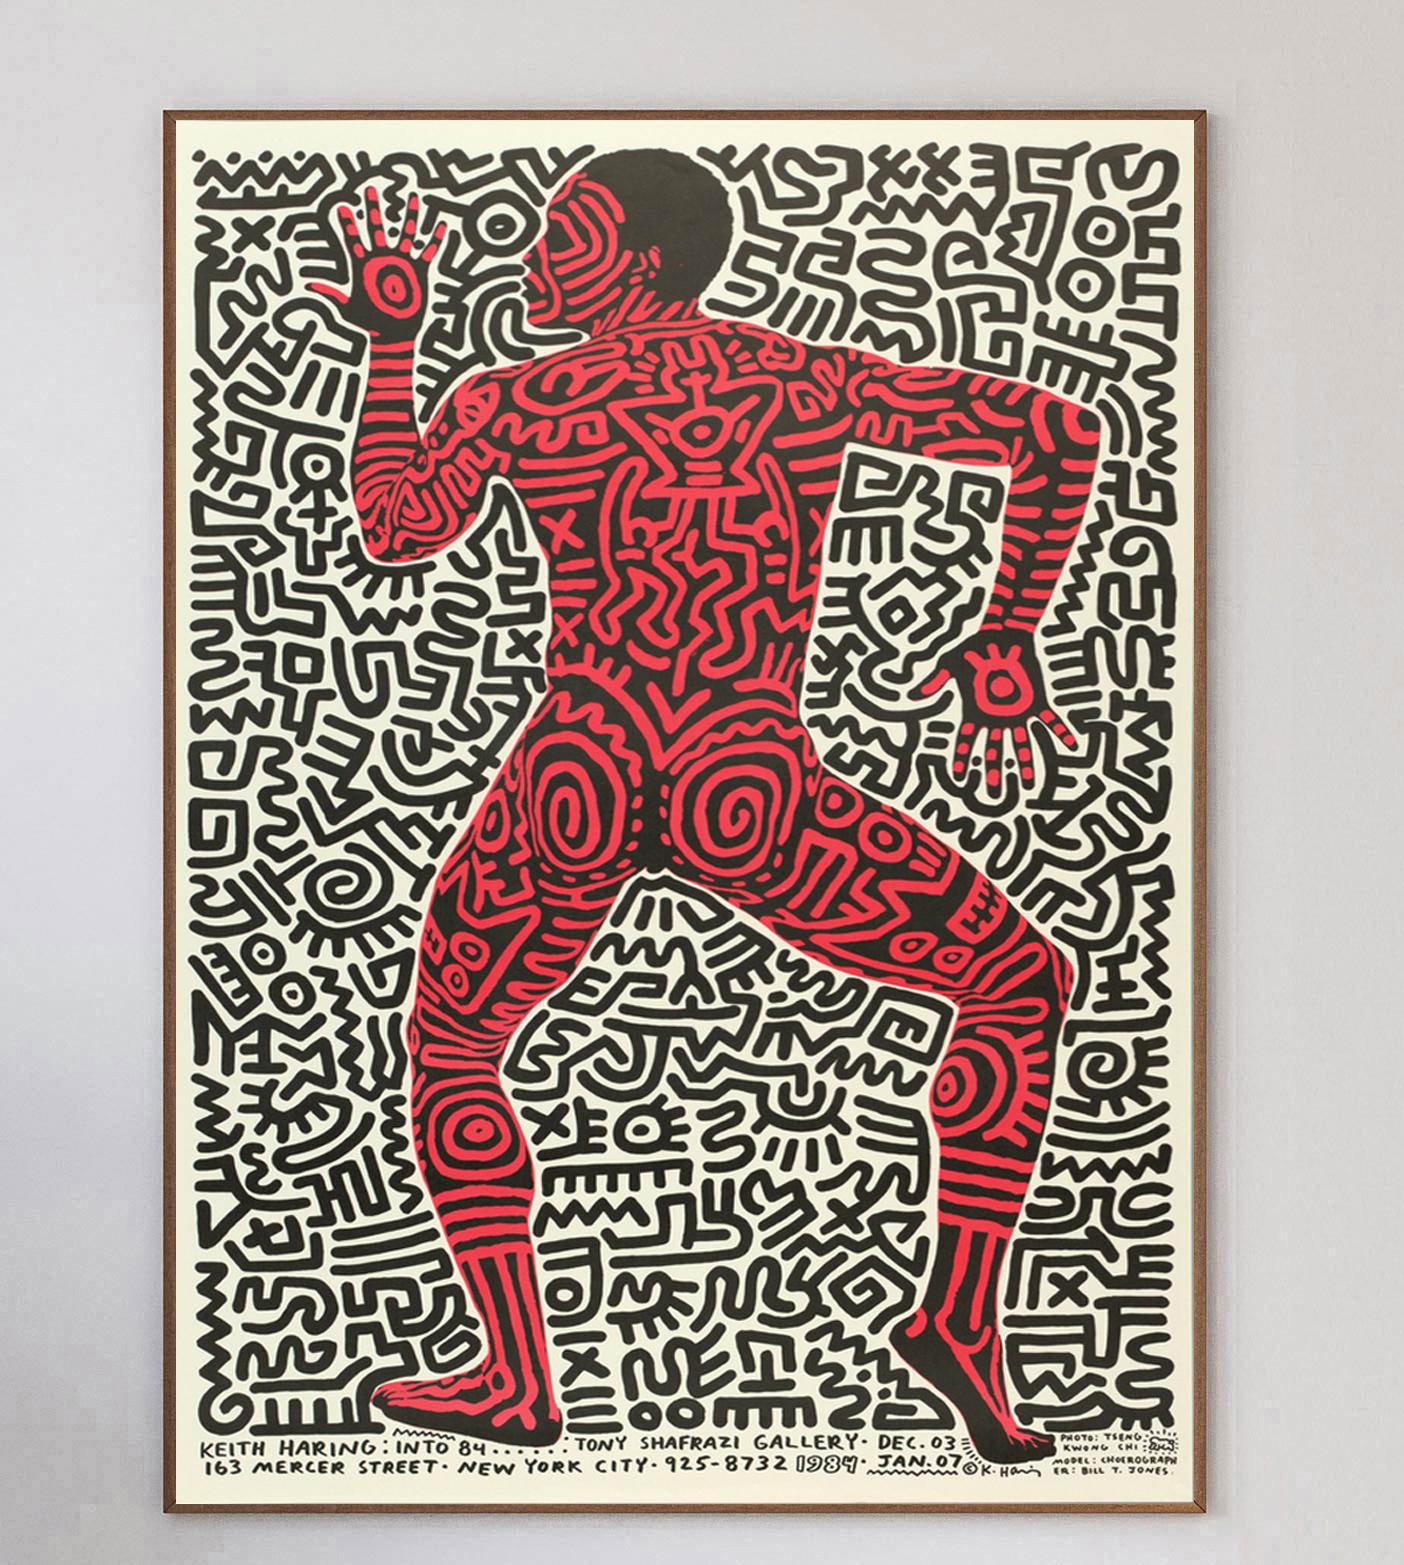 Depicting a figure facing away to the left, this stunning & rare piece was designed by American Pop & Street Artist Keith Haring. The poster was created by Haring to promote his exhibition at the Tony Shafrazi Gallery in New York from December 1983